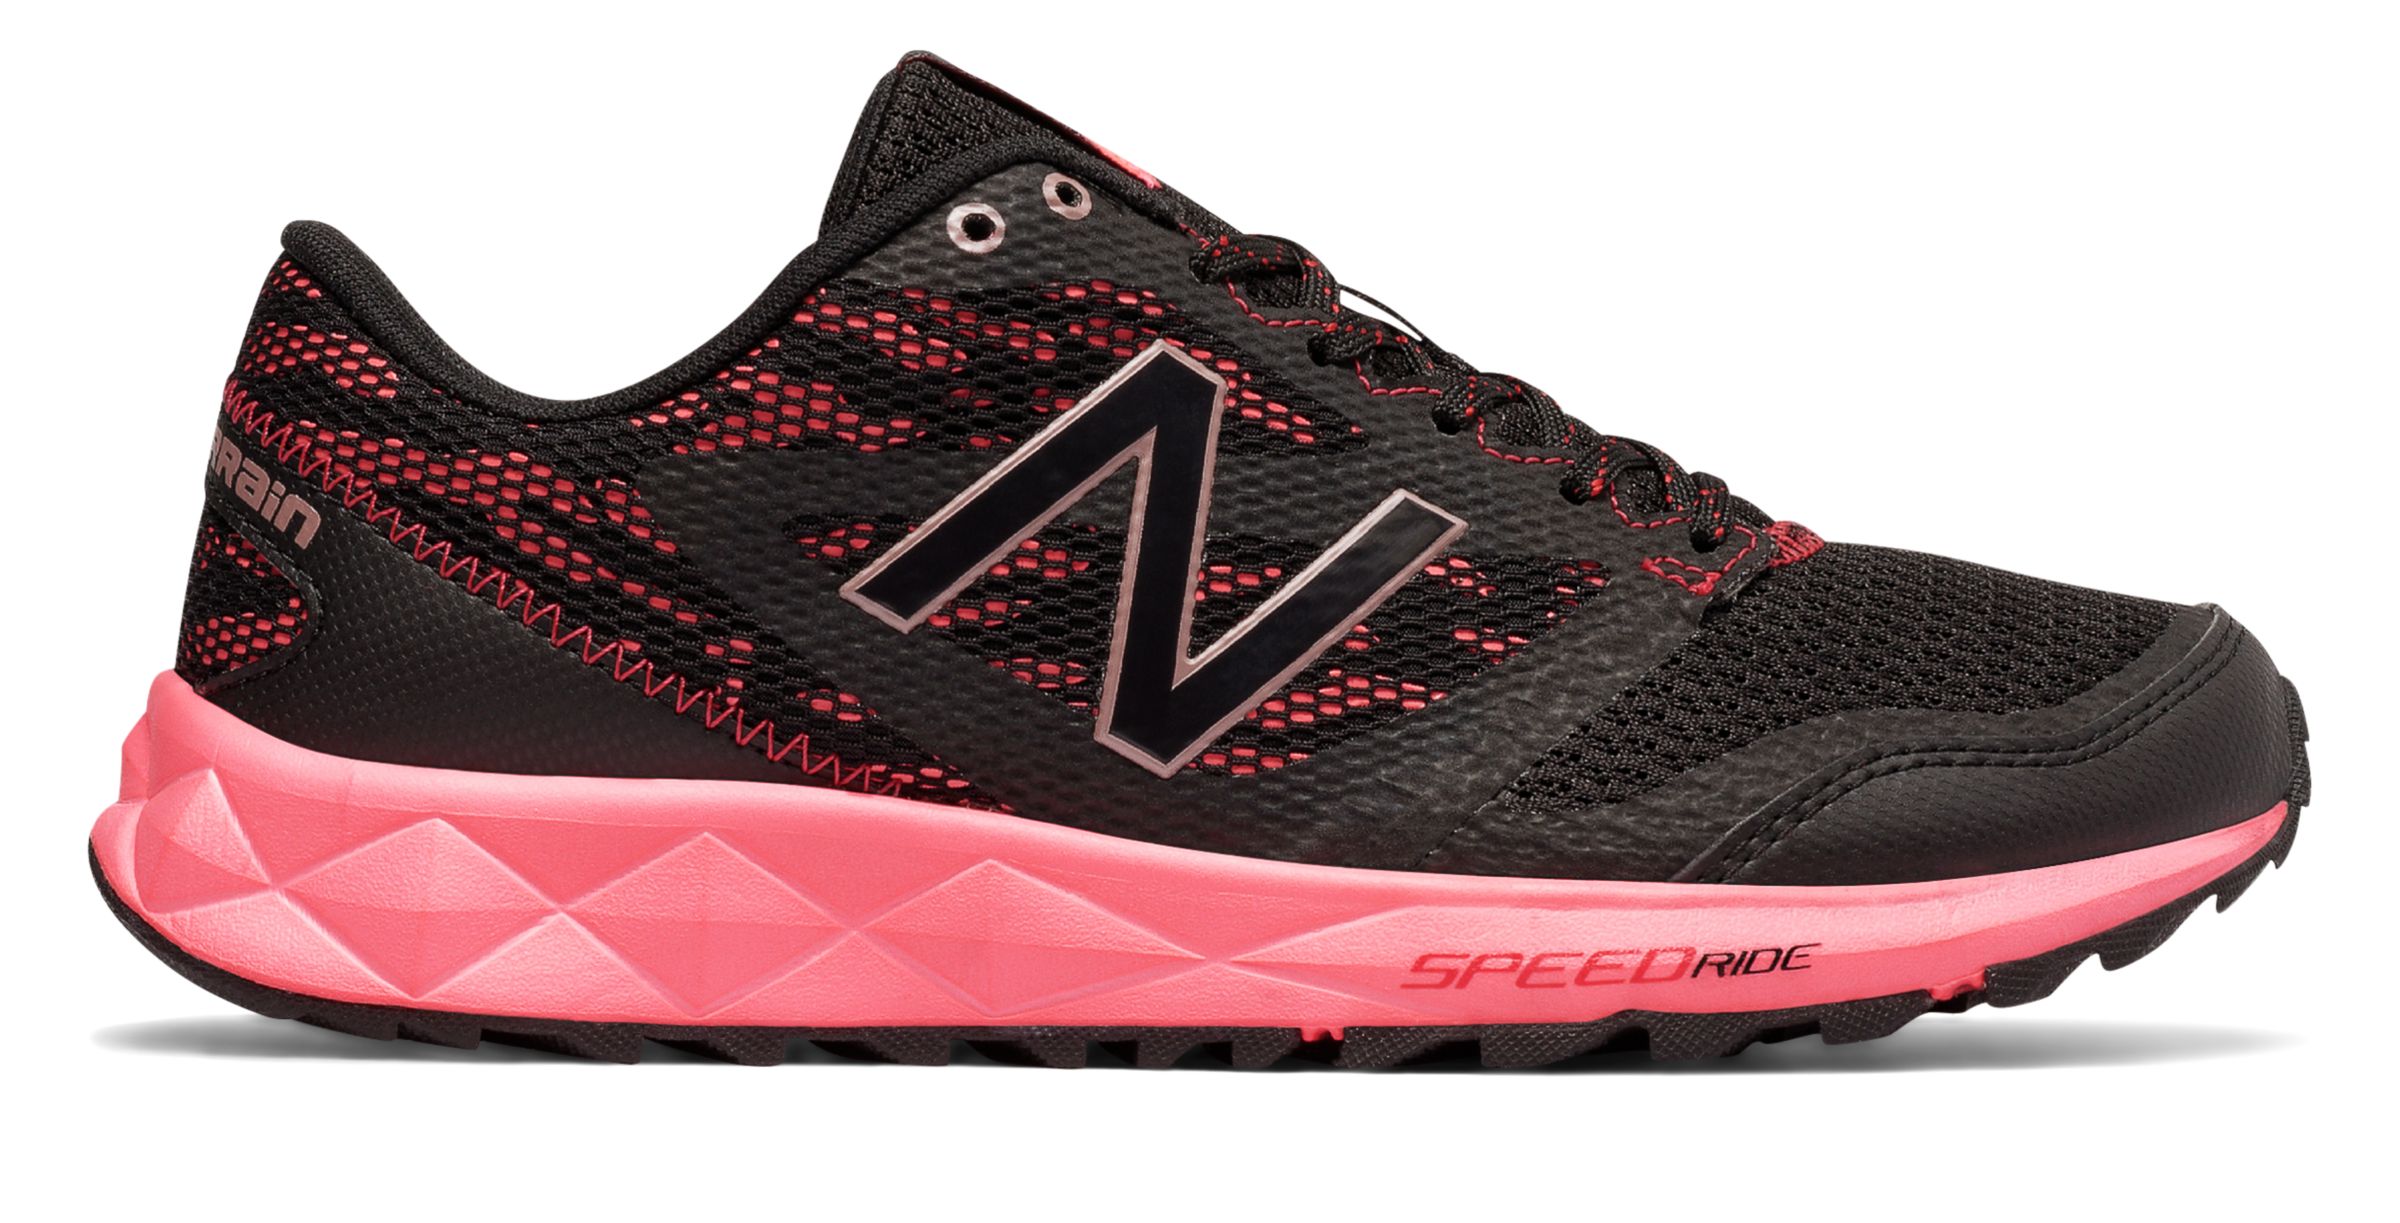 New Balance WT590-V2 on Sale - Discounts Up to 42% Off on WT590LB2 at Joe's New  Balance Outlet